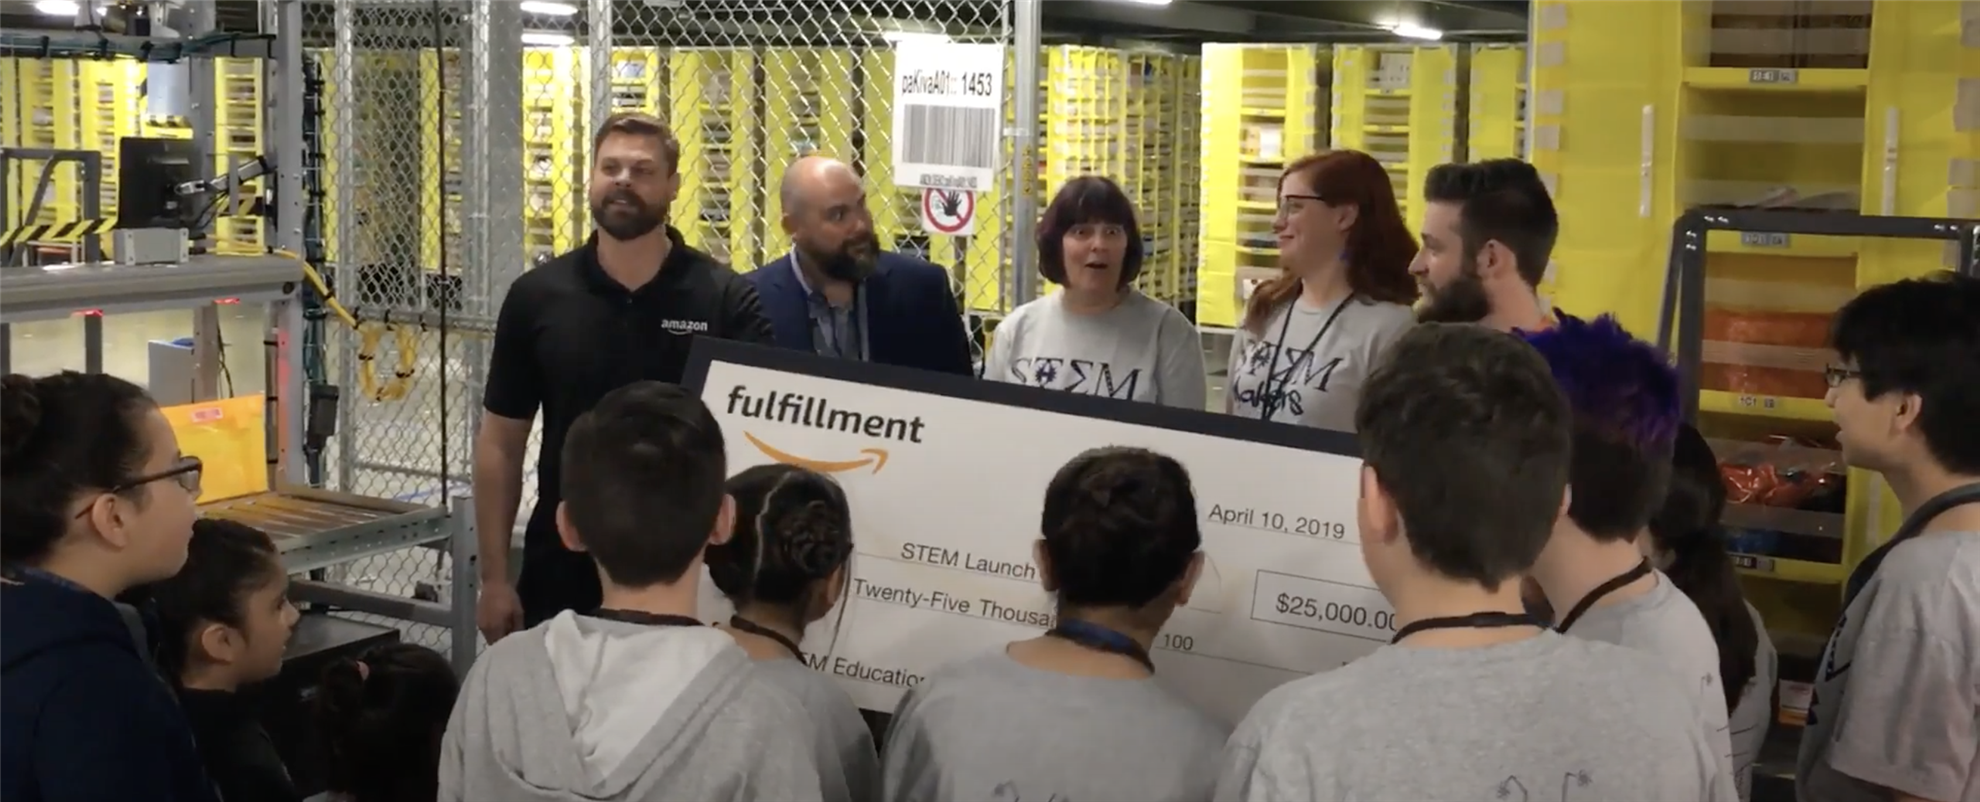 Students are gathered around as Amazon representatives surprise Deb Harding and other teachers with a giant $25,000 check